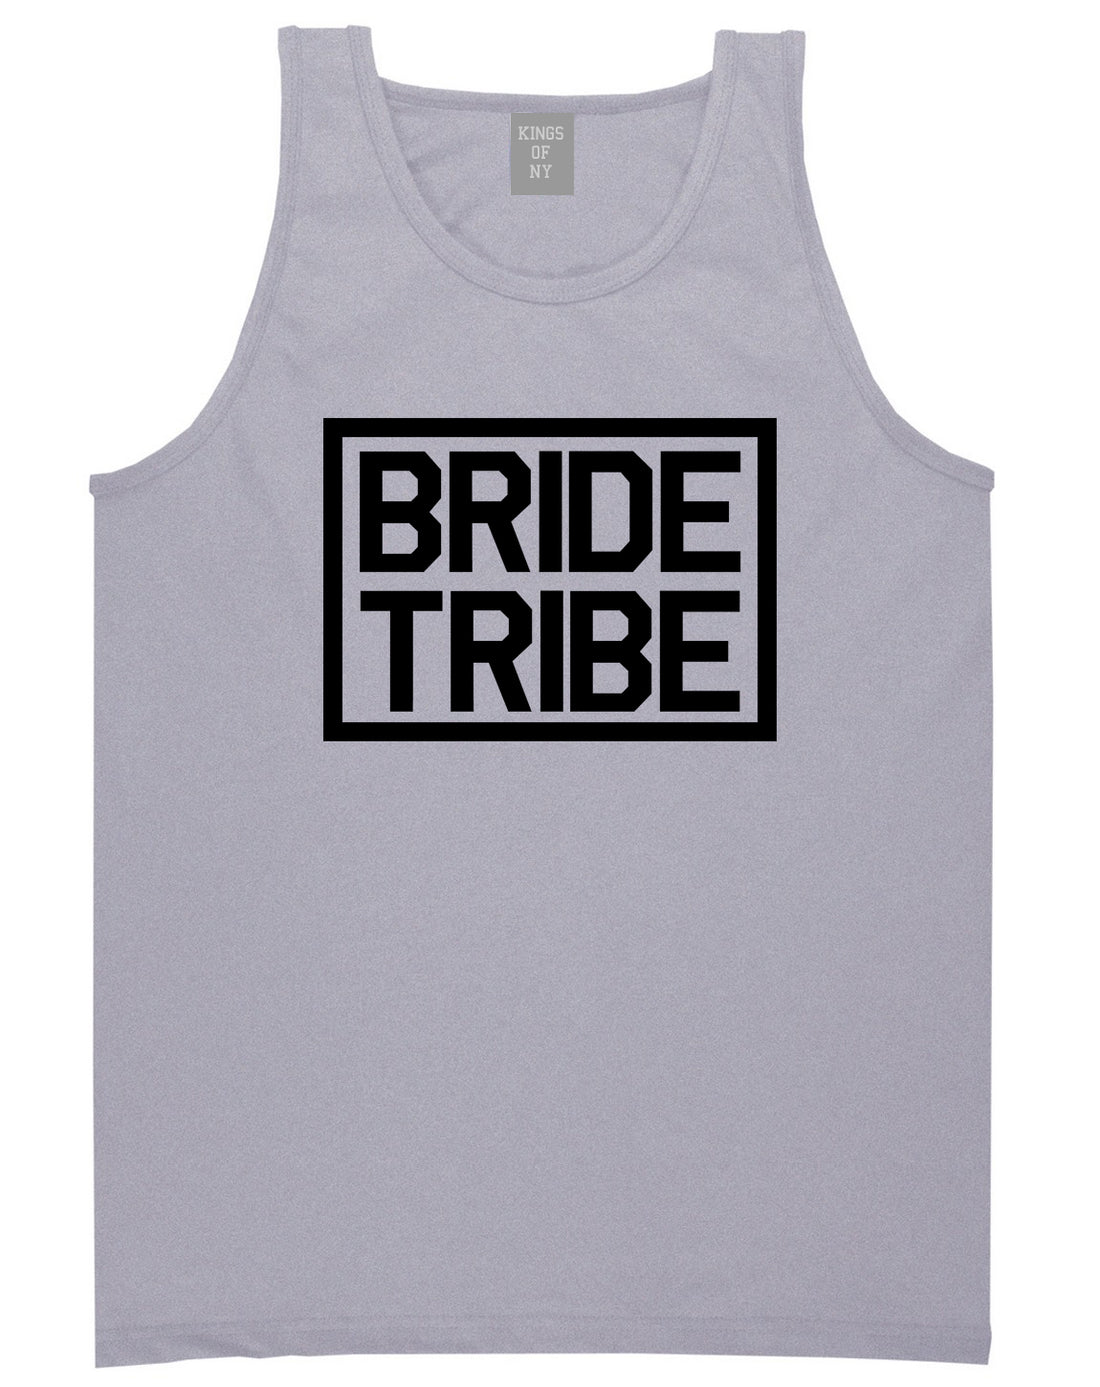 Bride Tribe Bachlorette Party Grey Tank Top Shirt by Kings Of NY